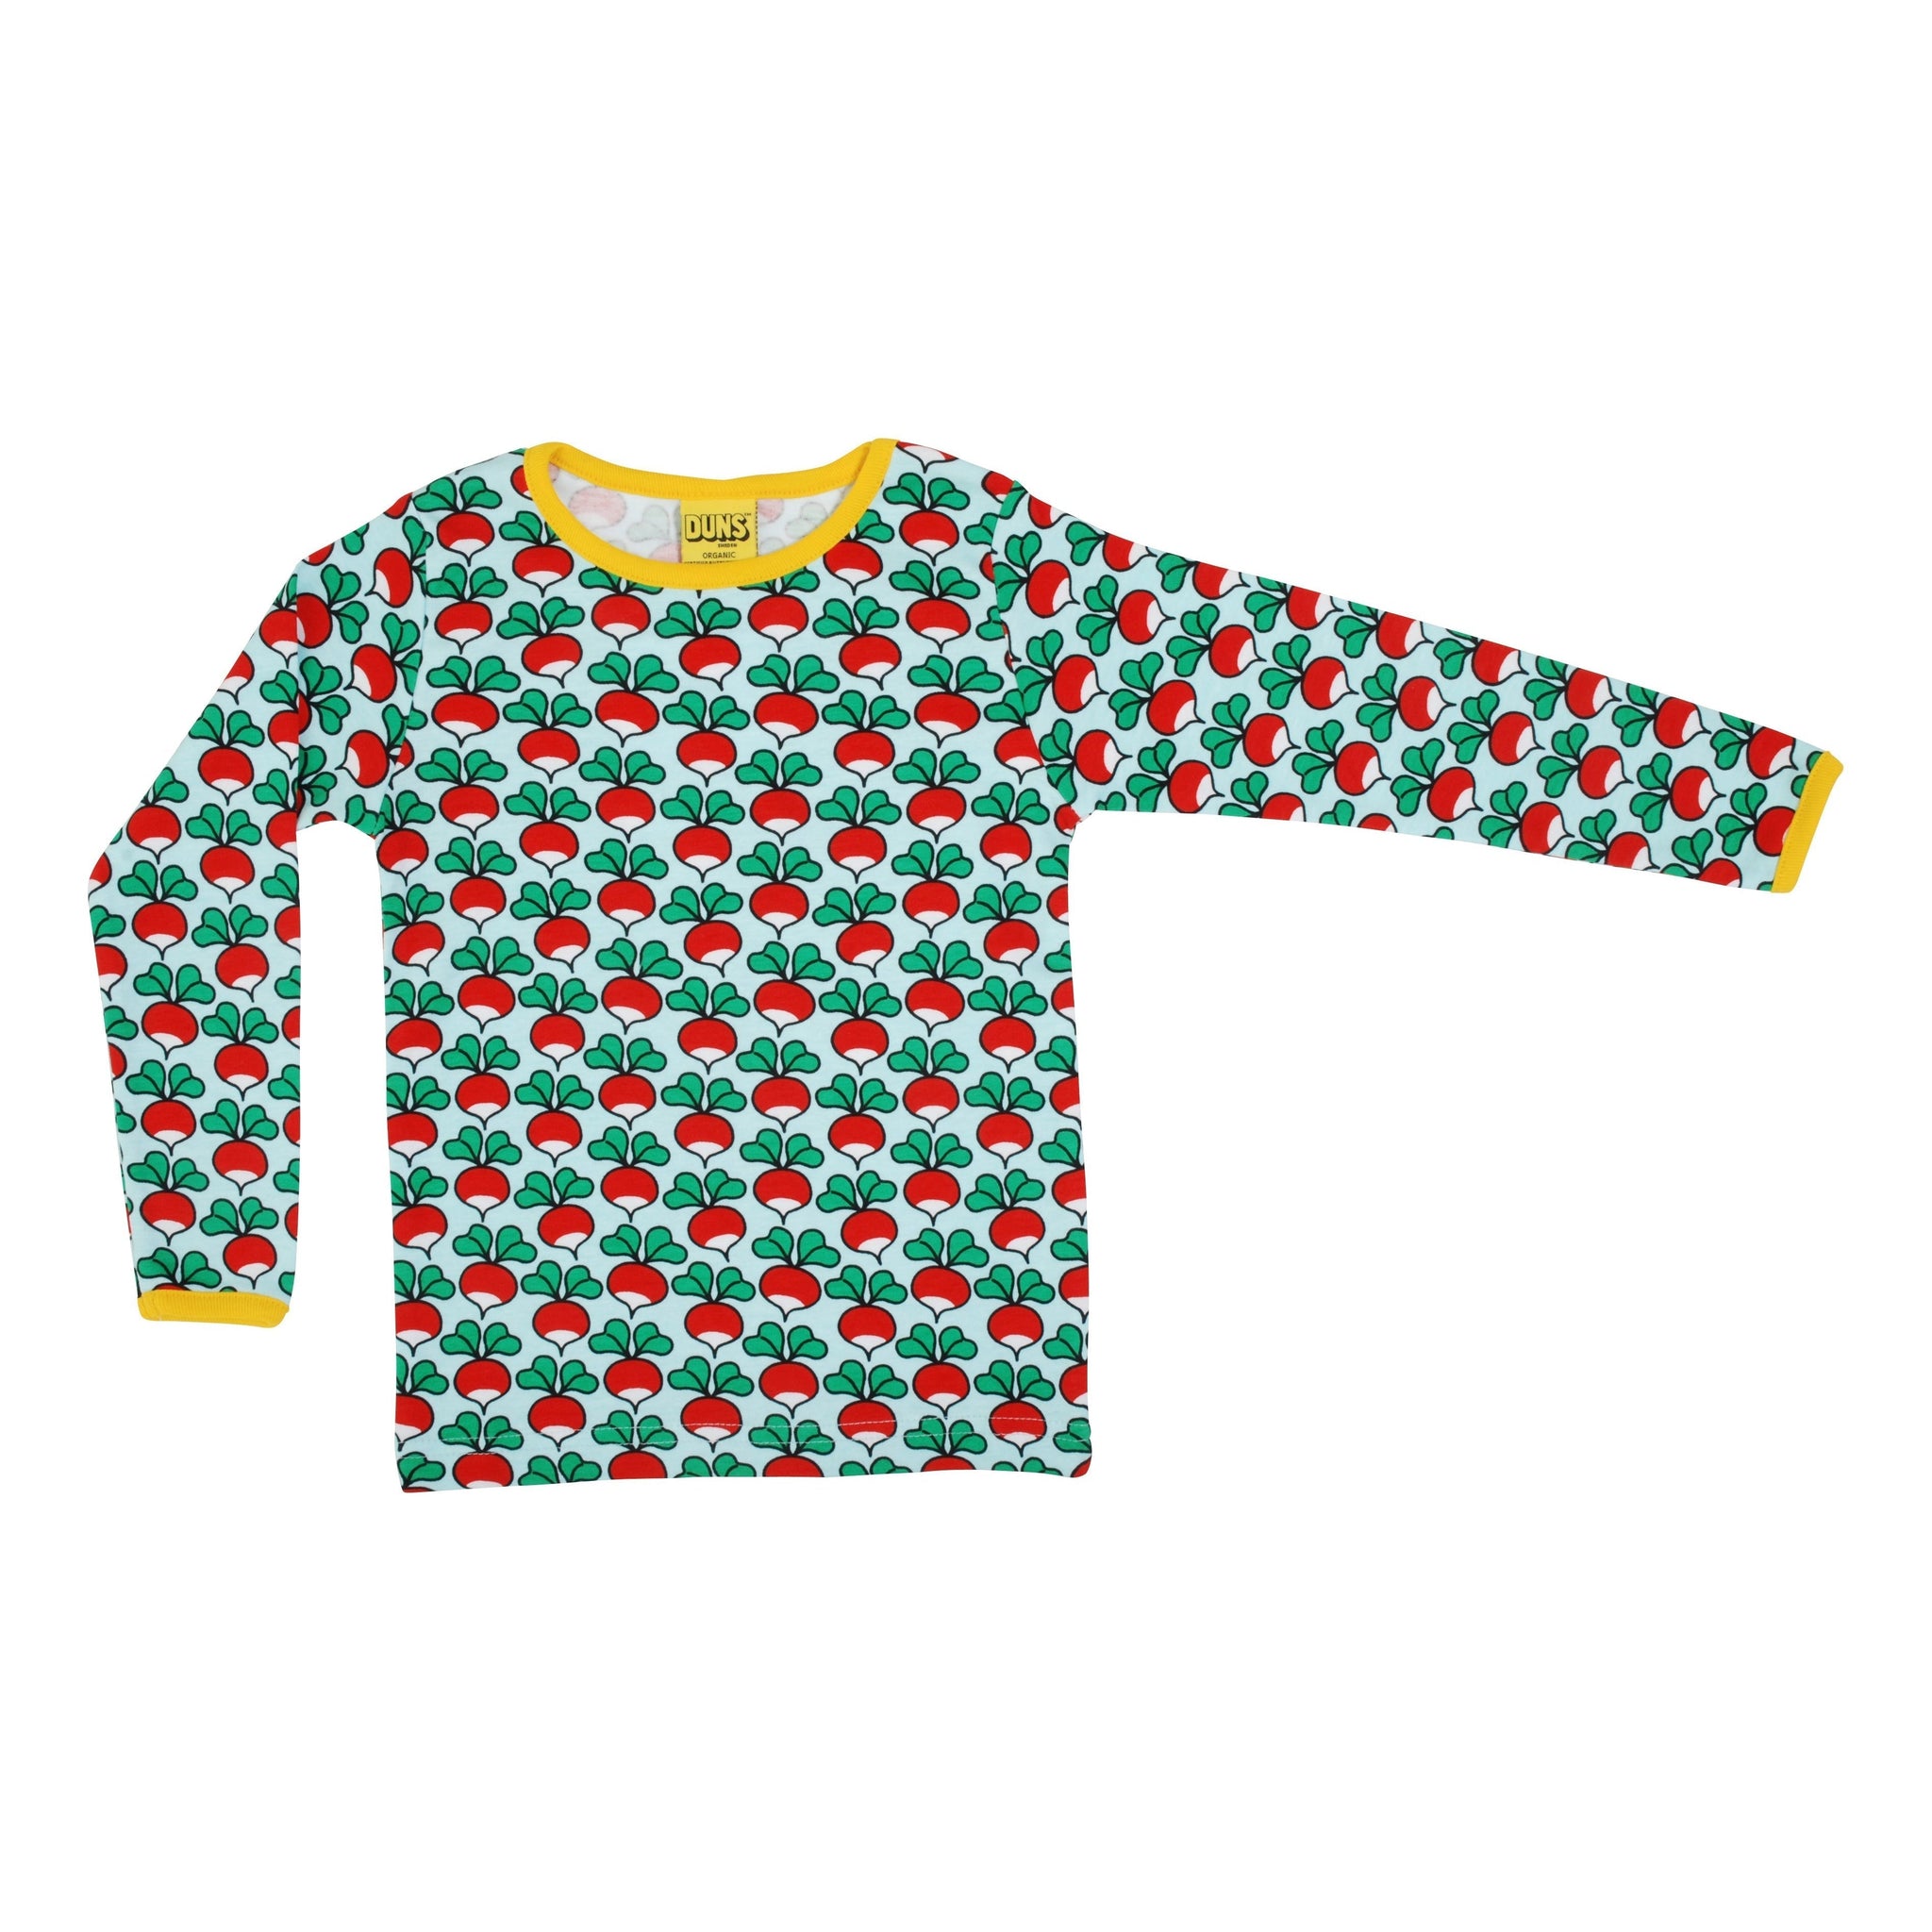 DUNS Sweden - Radish Long Sleeved Top (Clearwater) (10 Years)